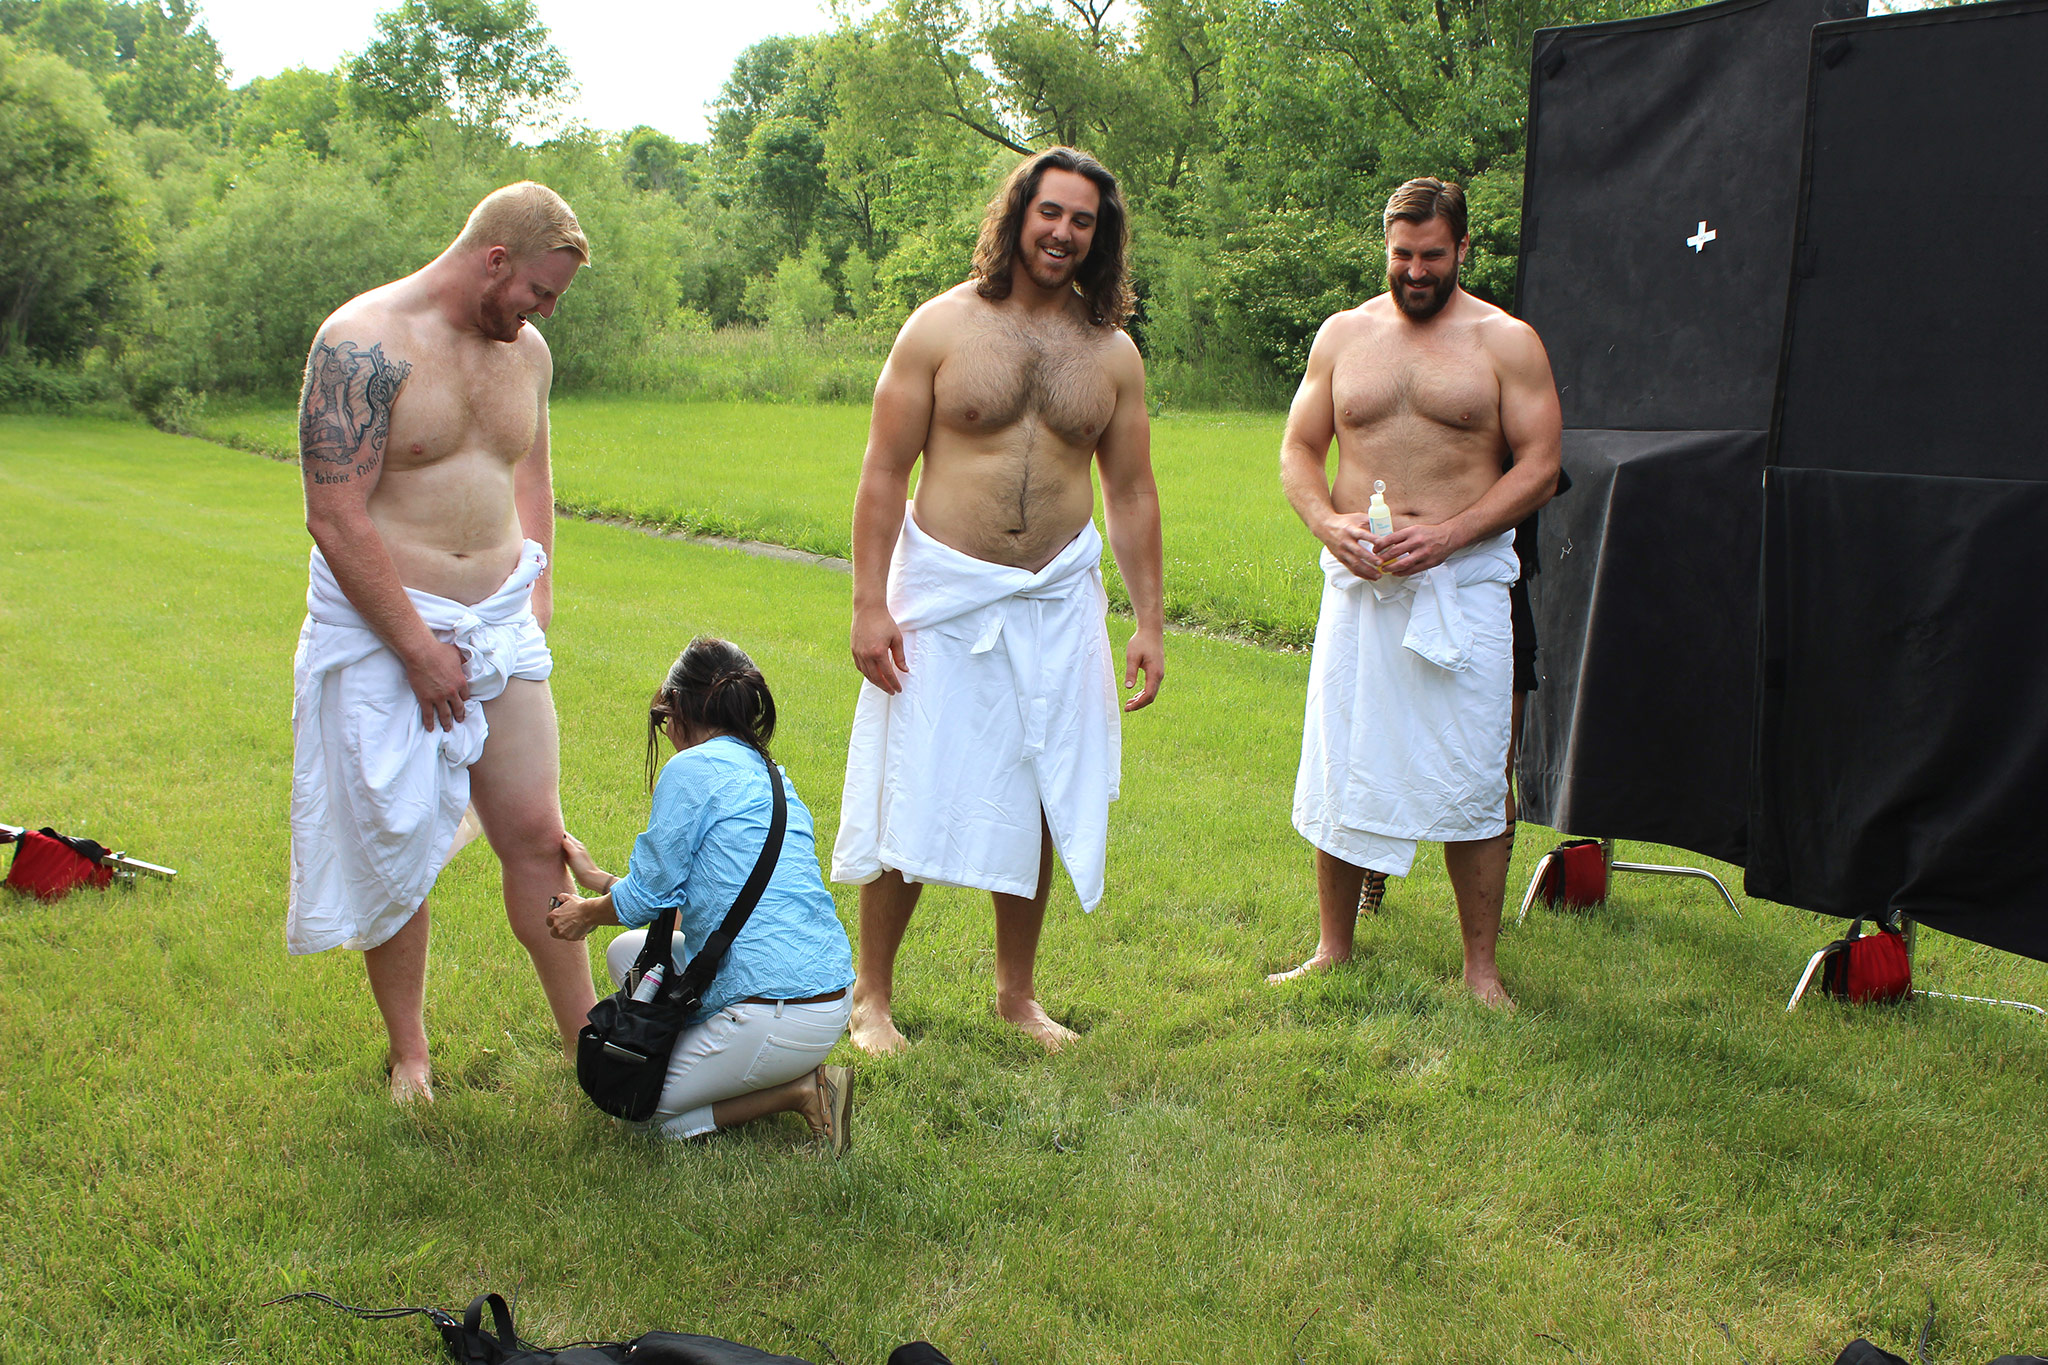 ESPN Releases 2015 Body Issue Roster - ESPN Press Room U.S.